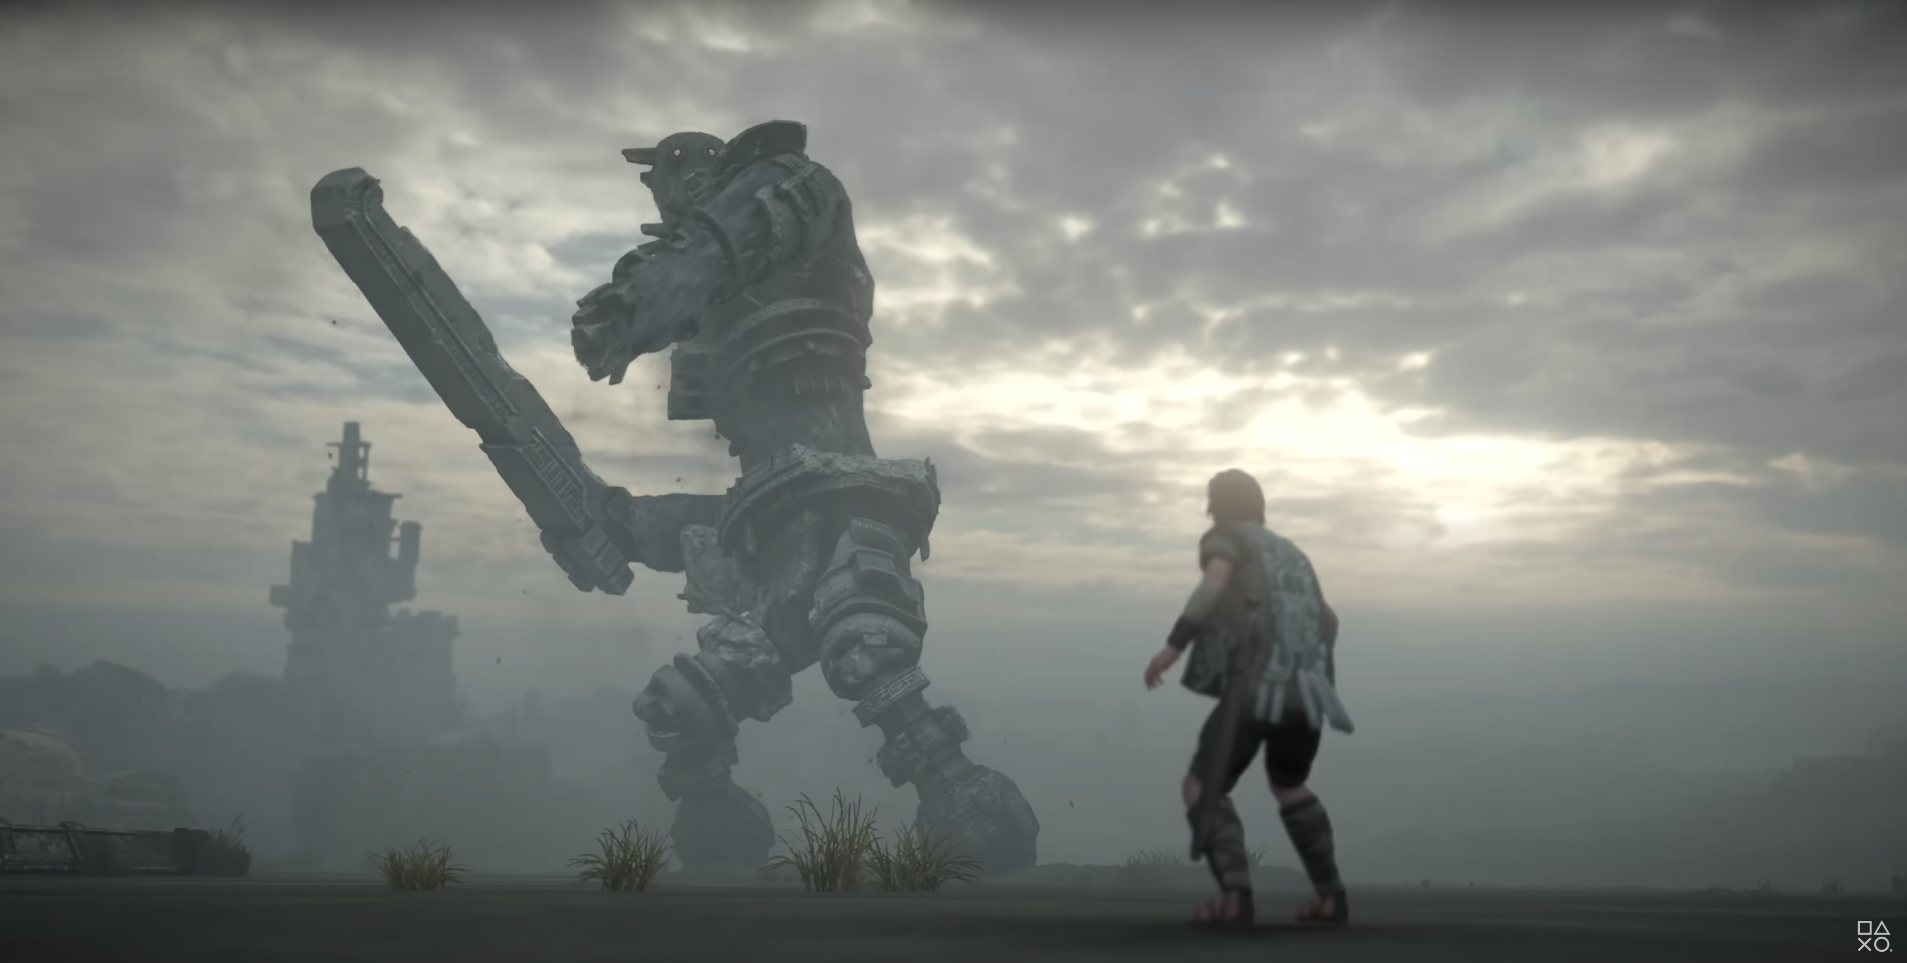 A screenshot from Shadow of the Colossus showing the hero, Wander, in combat with one of the game's colossi.